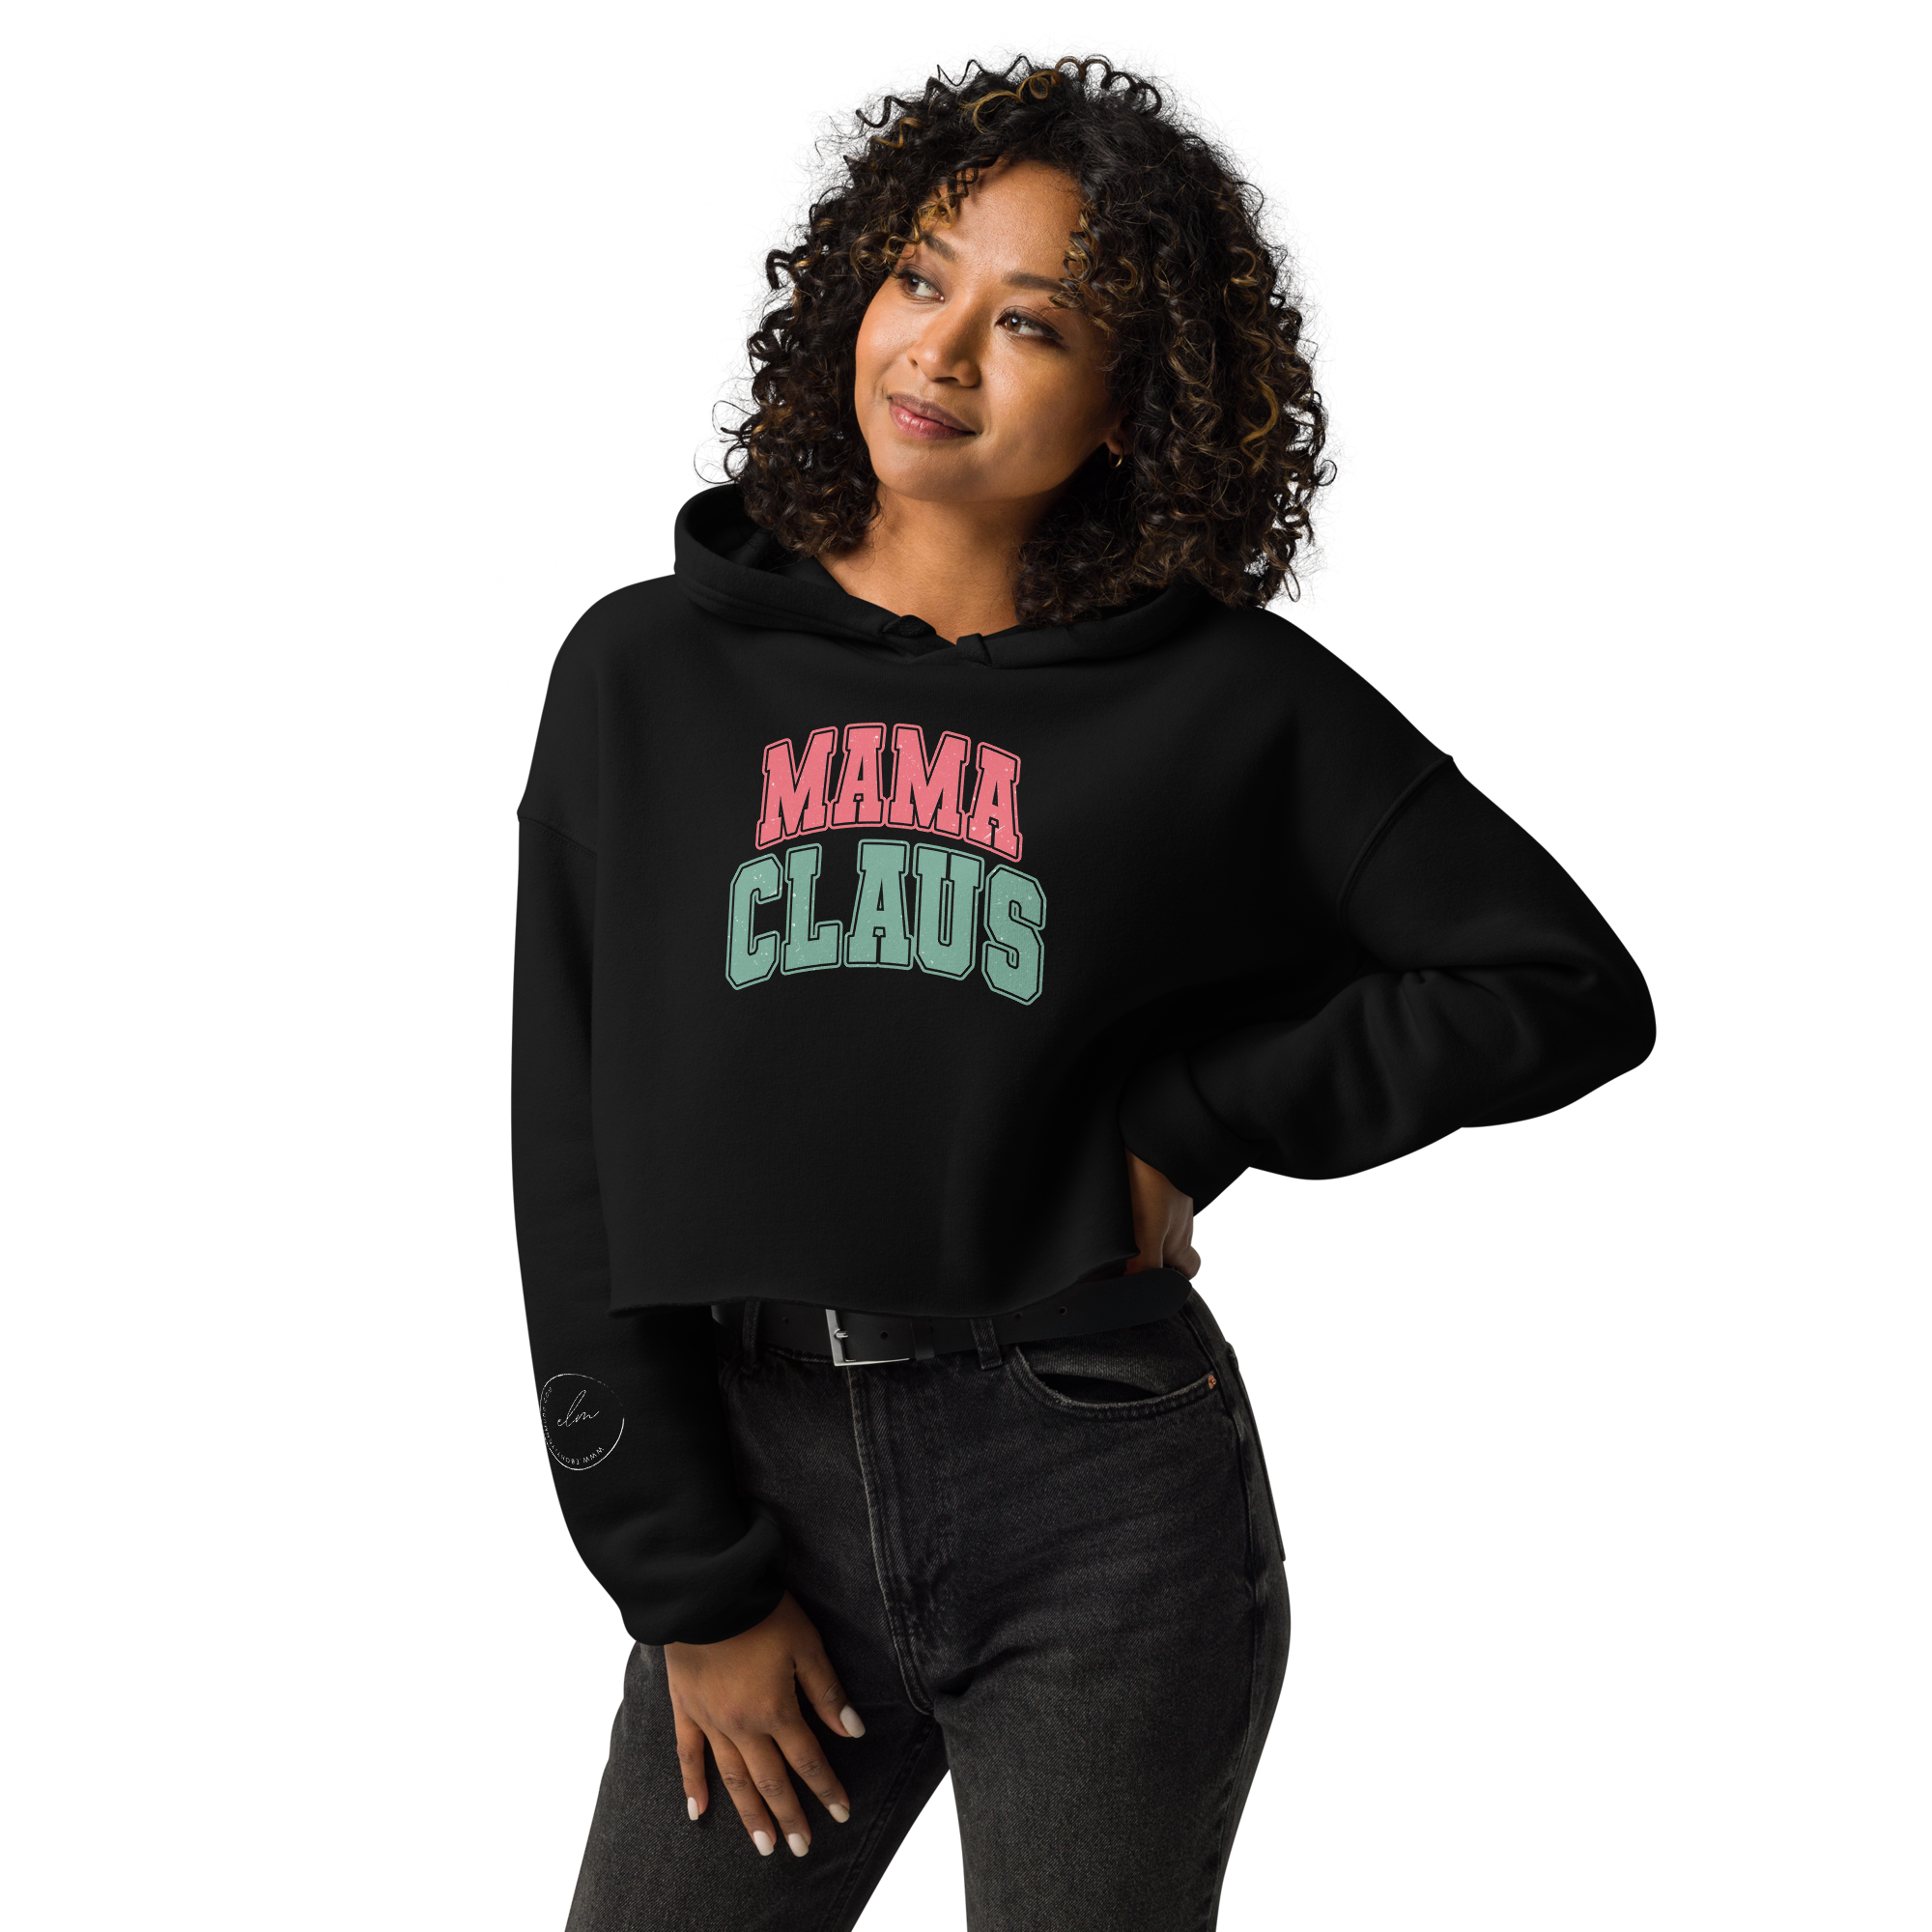 MAMA CLAUS Cropped Hoodie - Comes in a t-shirt design with different color options too!